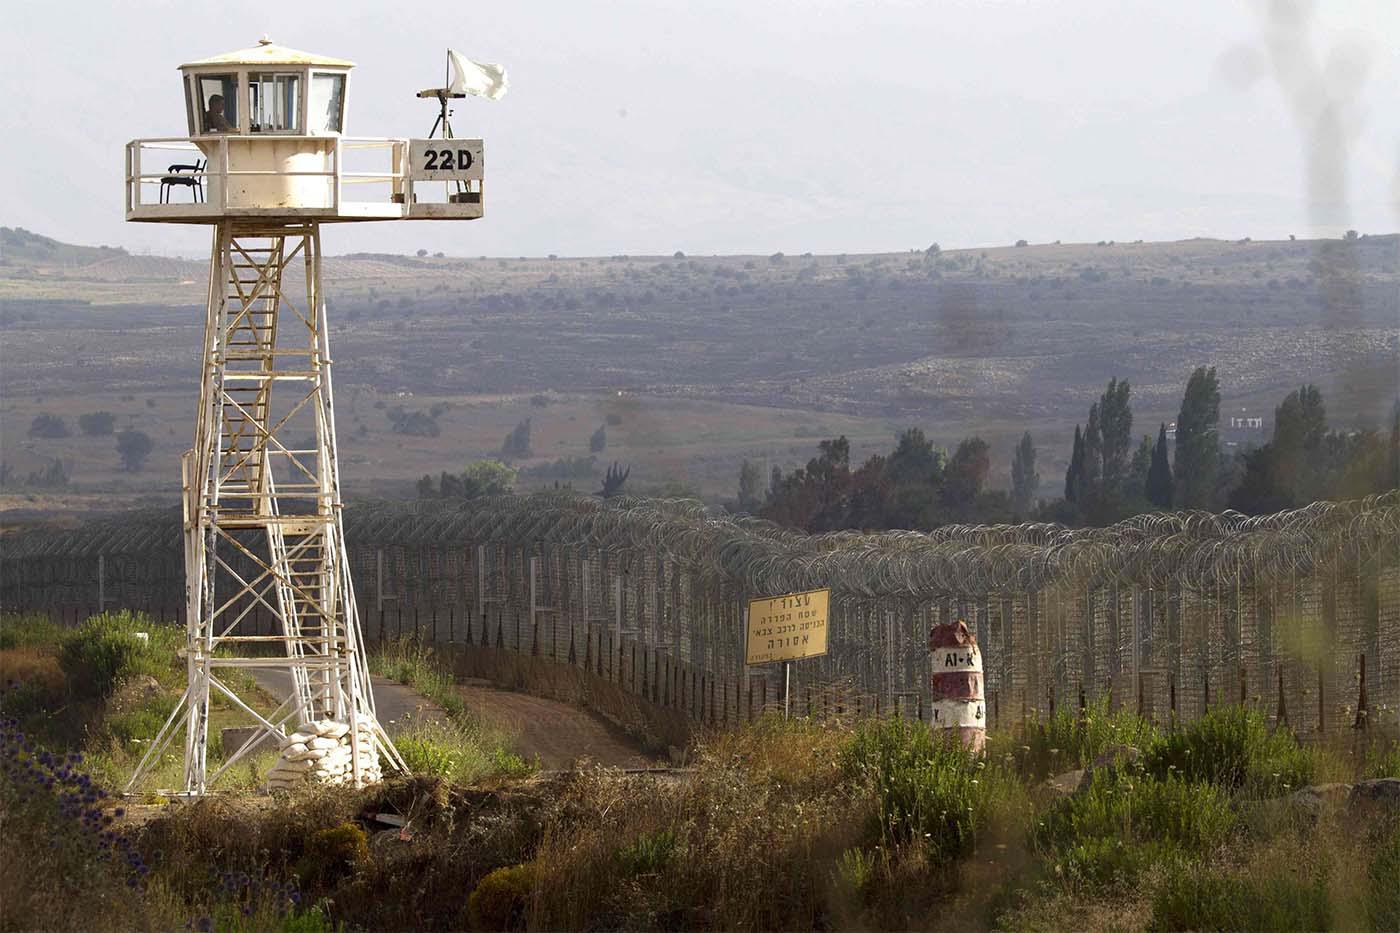 Israeli strikes have previously targeted Tall al-Hara where Hezbollah has installed a radar system